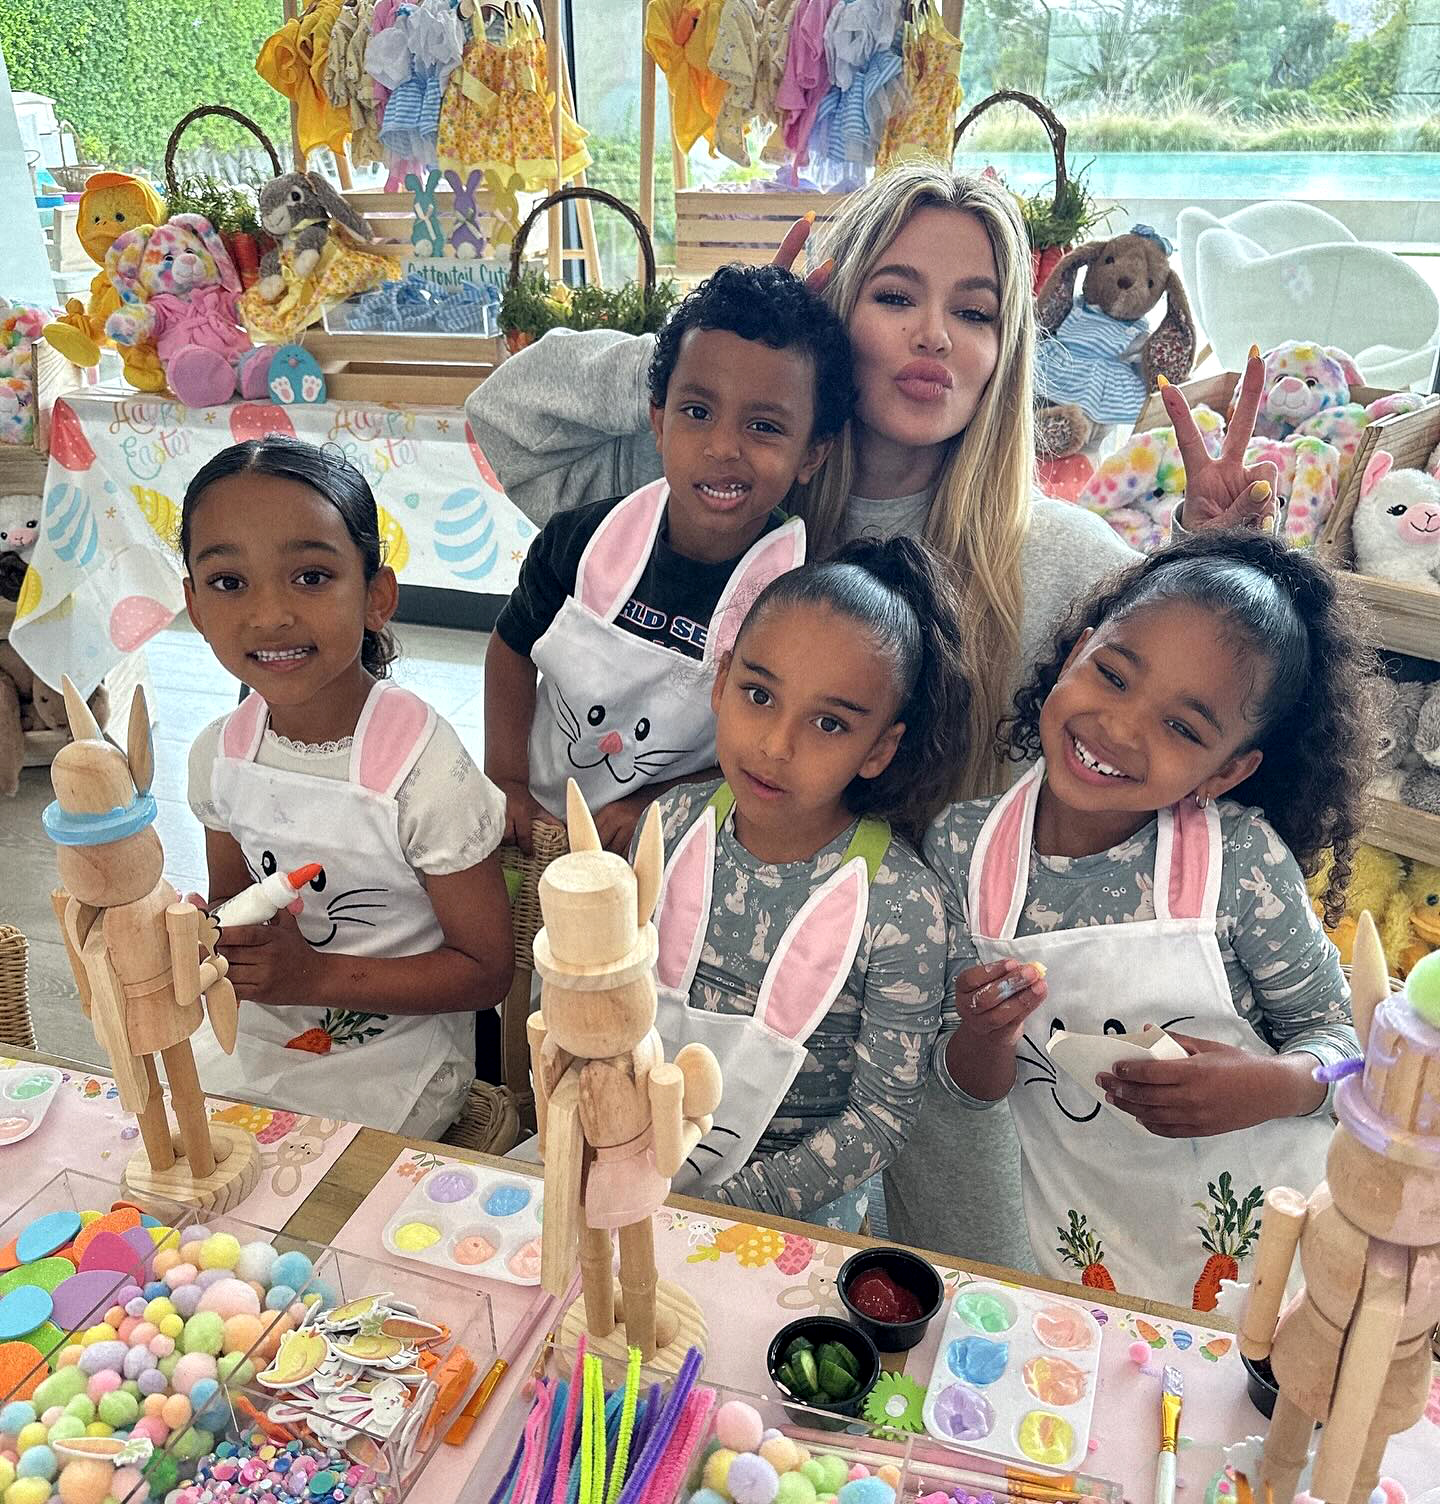 The Kardashian-Jenner Cousins Have the Cutest Matching Easter Outfits